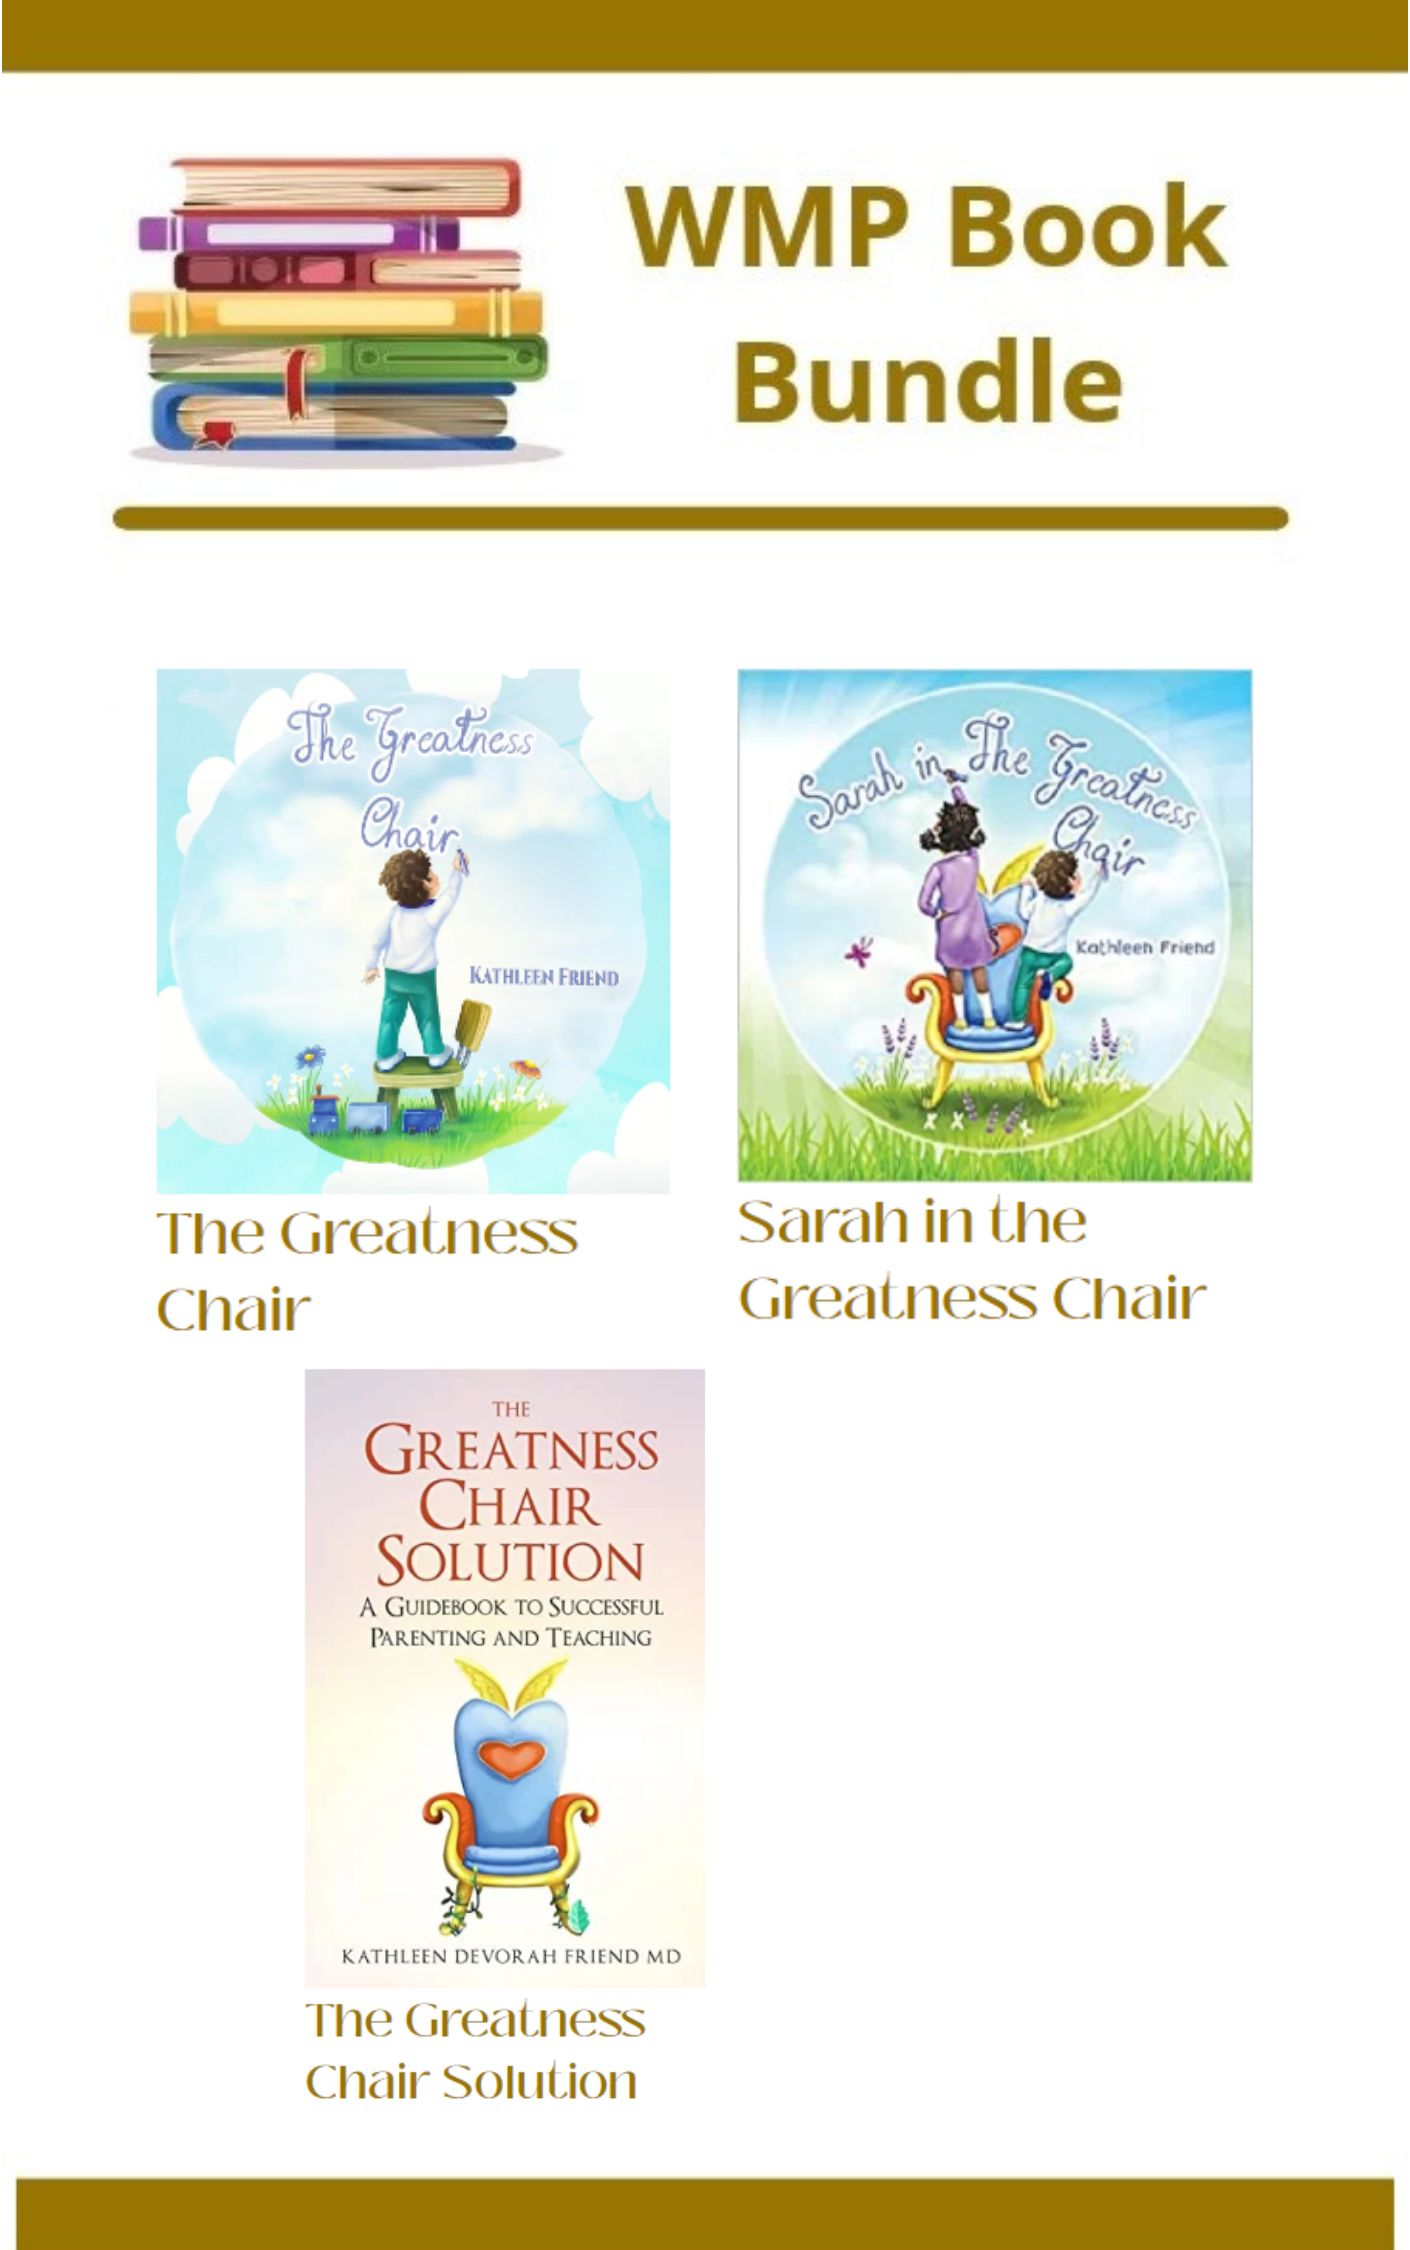 The Greatness Chair Series Bundle